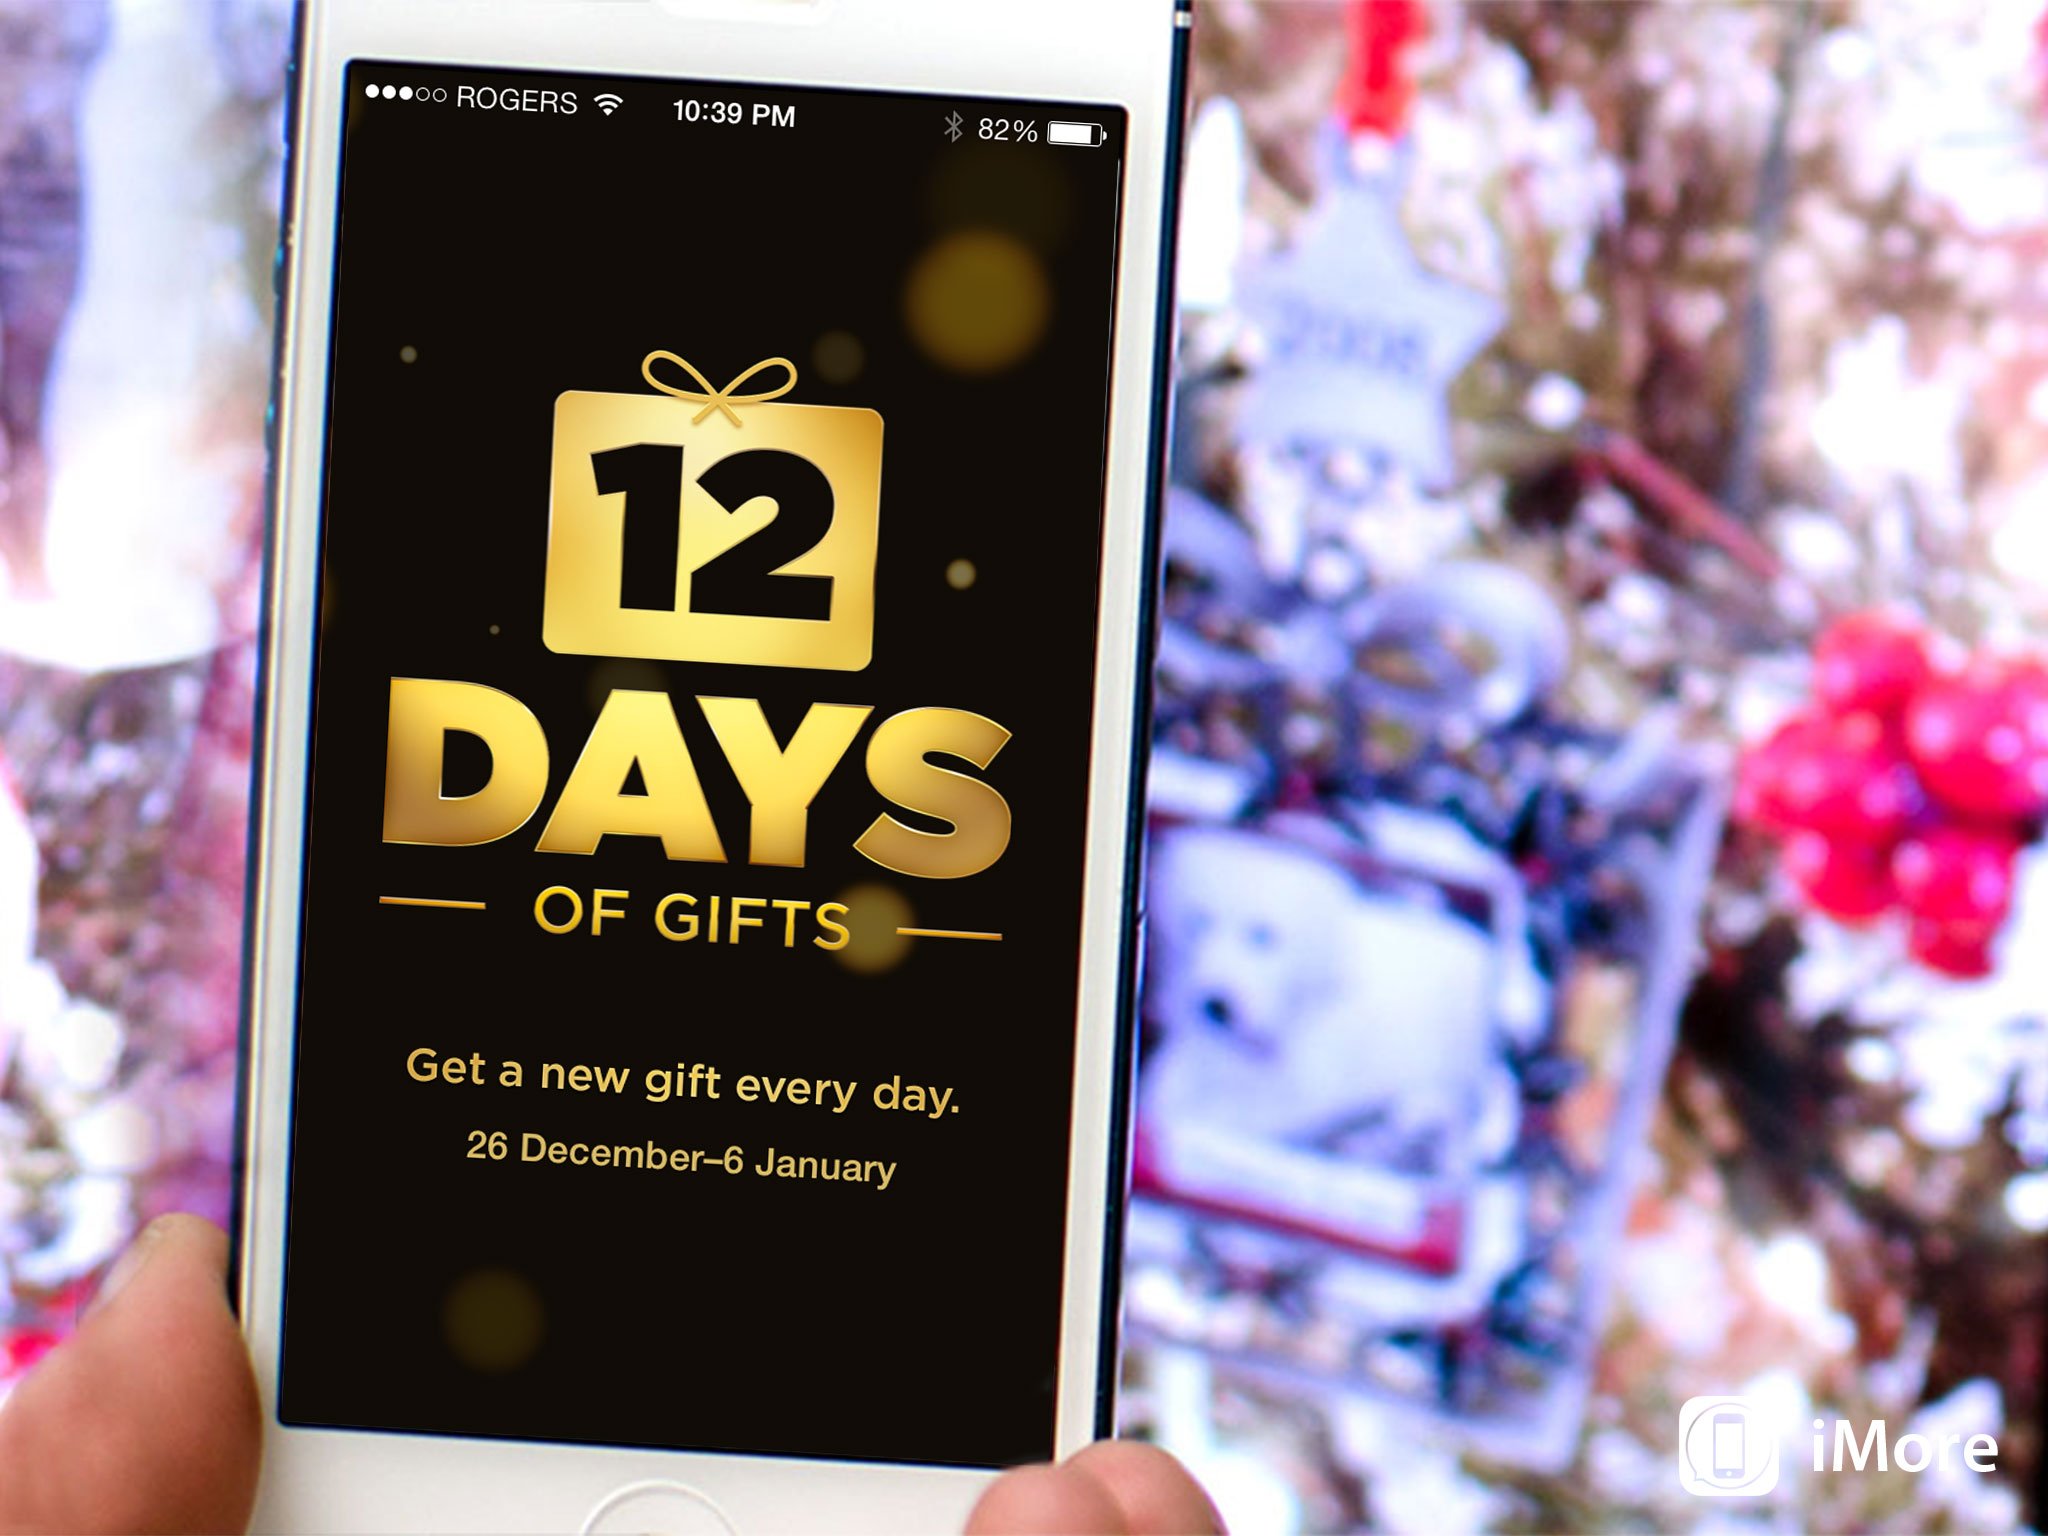 Apple releases 12 Days of Gifts app for iPhone and iPad, will give you free apps, iBooks, movie rentals, TV episodes from December 26 to January 6